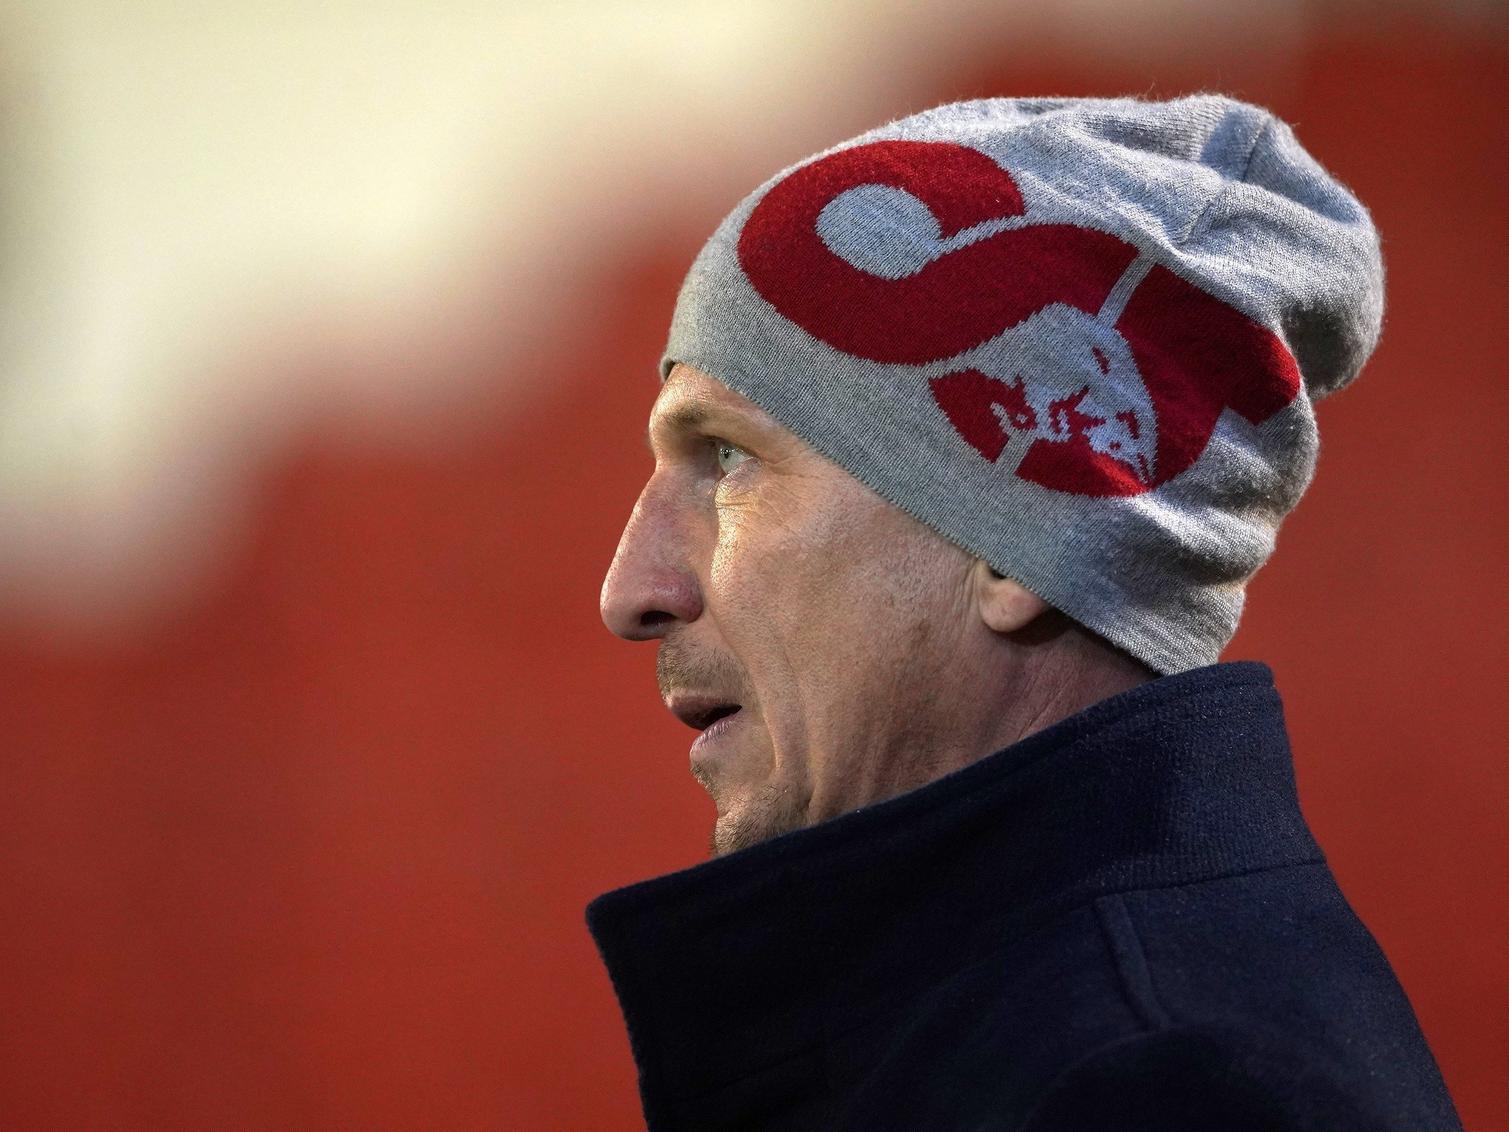 A run of three straight defeats has left Barnsley seven points from safety after losing a relegation six-pointer to Charlton on Saturday. Gerhard Struber blasted the Tykes for always making the same mistakes.